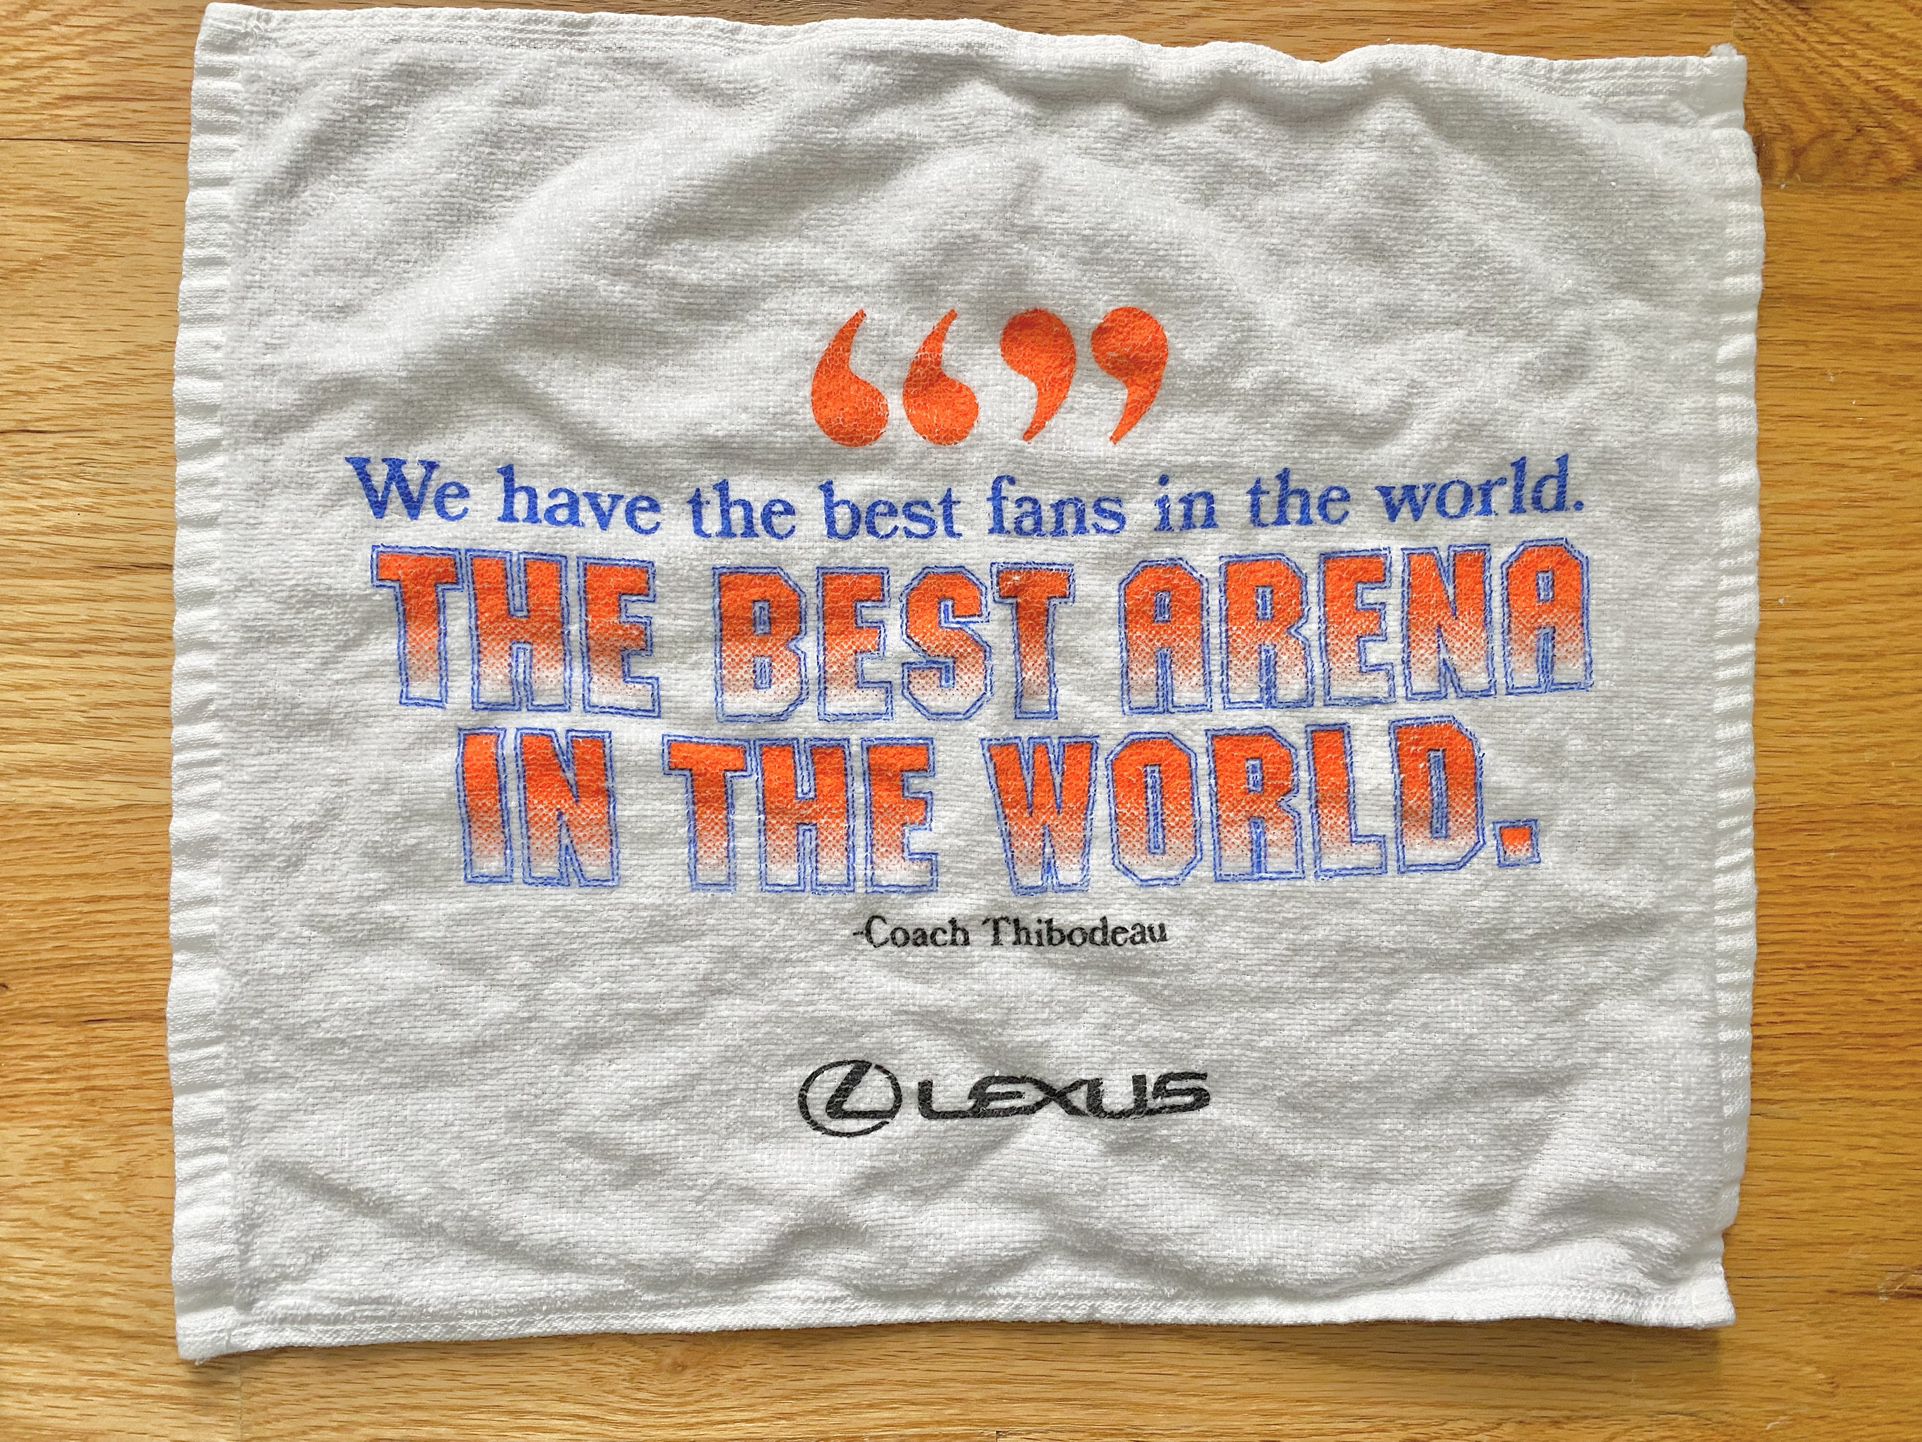 Knicks 10% Cotton Hand Towel: “We have the best fans in the world”